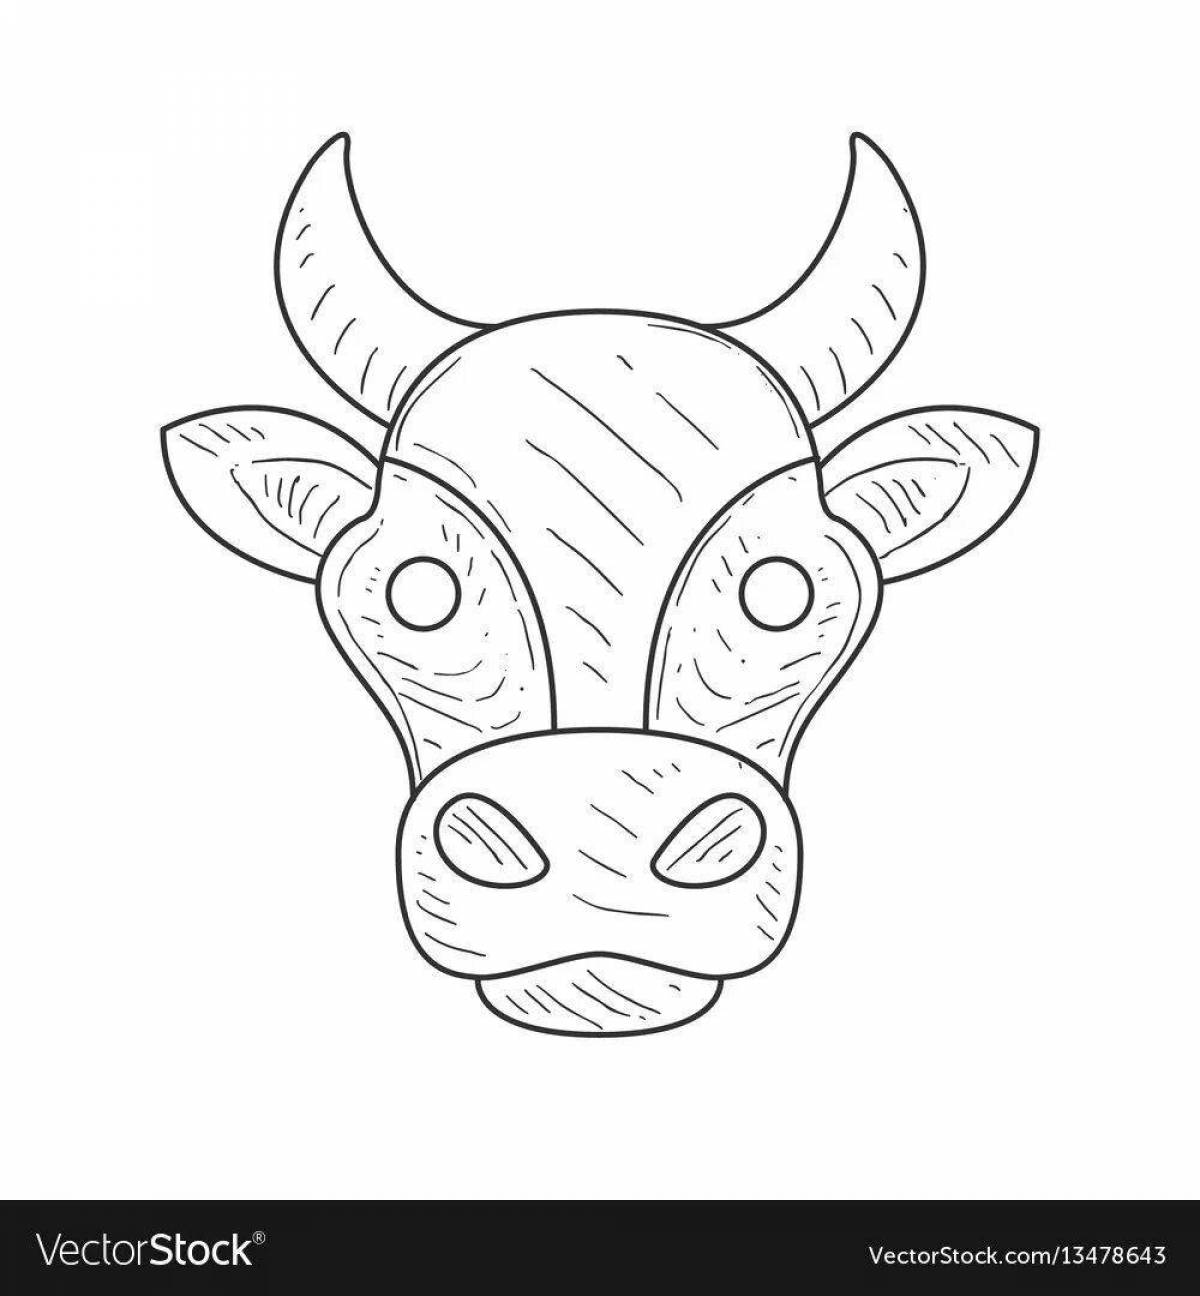 Gorgeous cow head coloring page